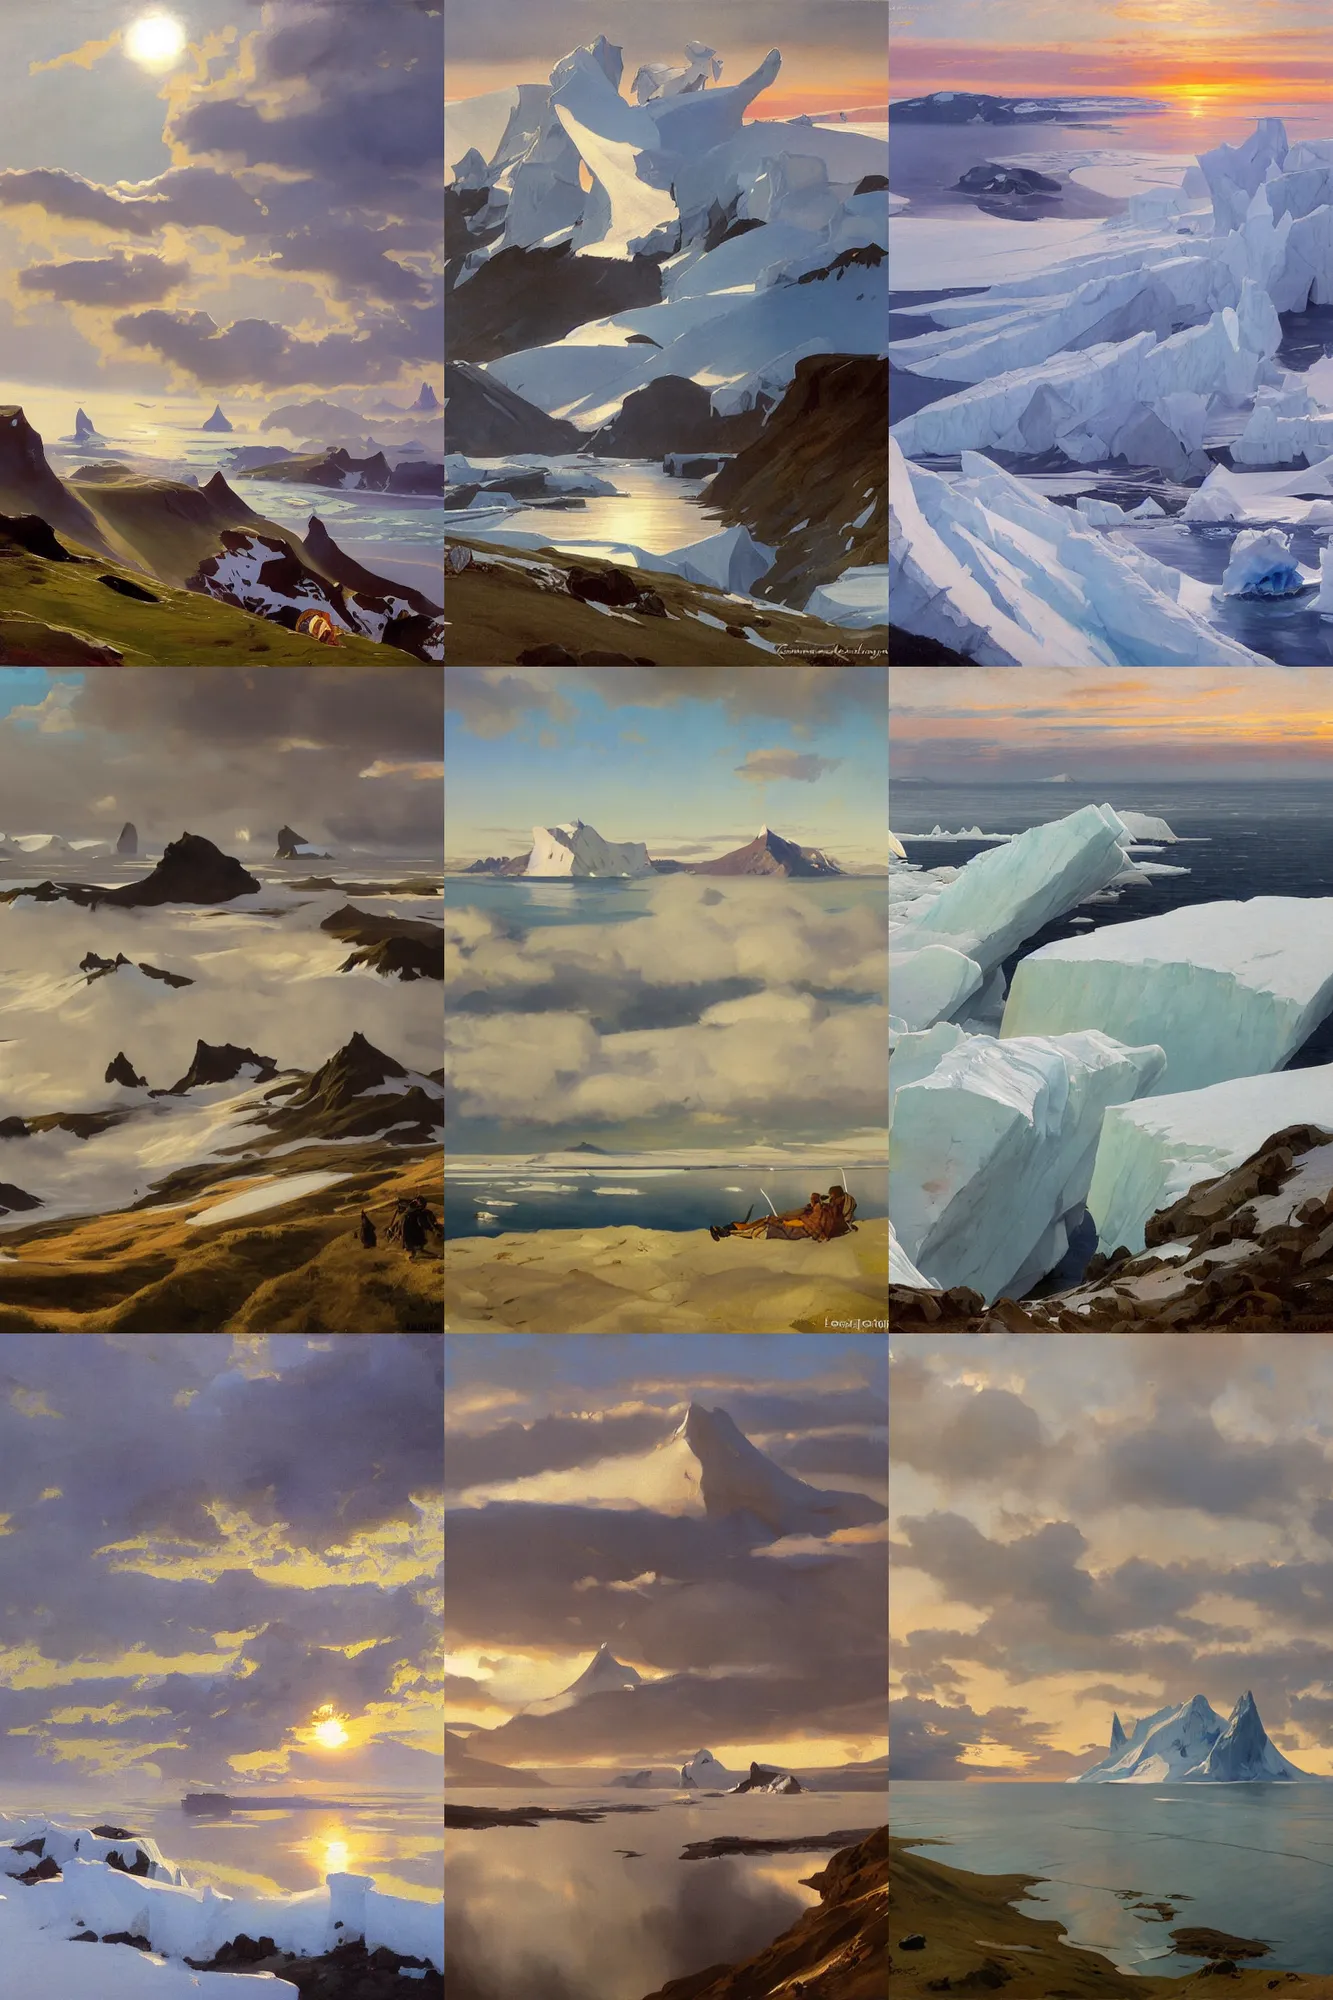 Prompt: painting by sargent leyendecker and gurney, rhads, vasnetsov, savrasov levitan polenov, middle ages, sunset sinrise, above the layered low clouds travel path road to sea bay view photo of greenland and iceland glacier and icebergs overcast sharpen